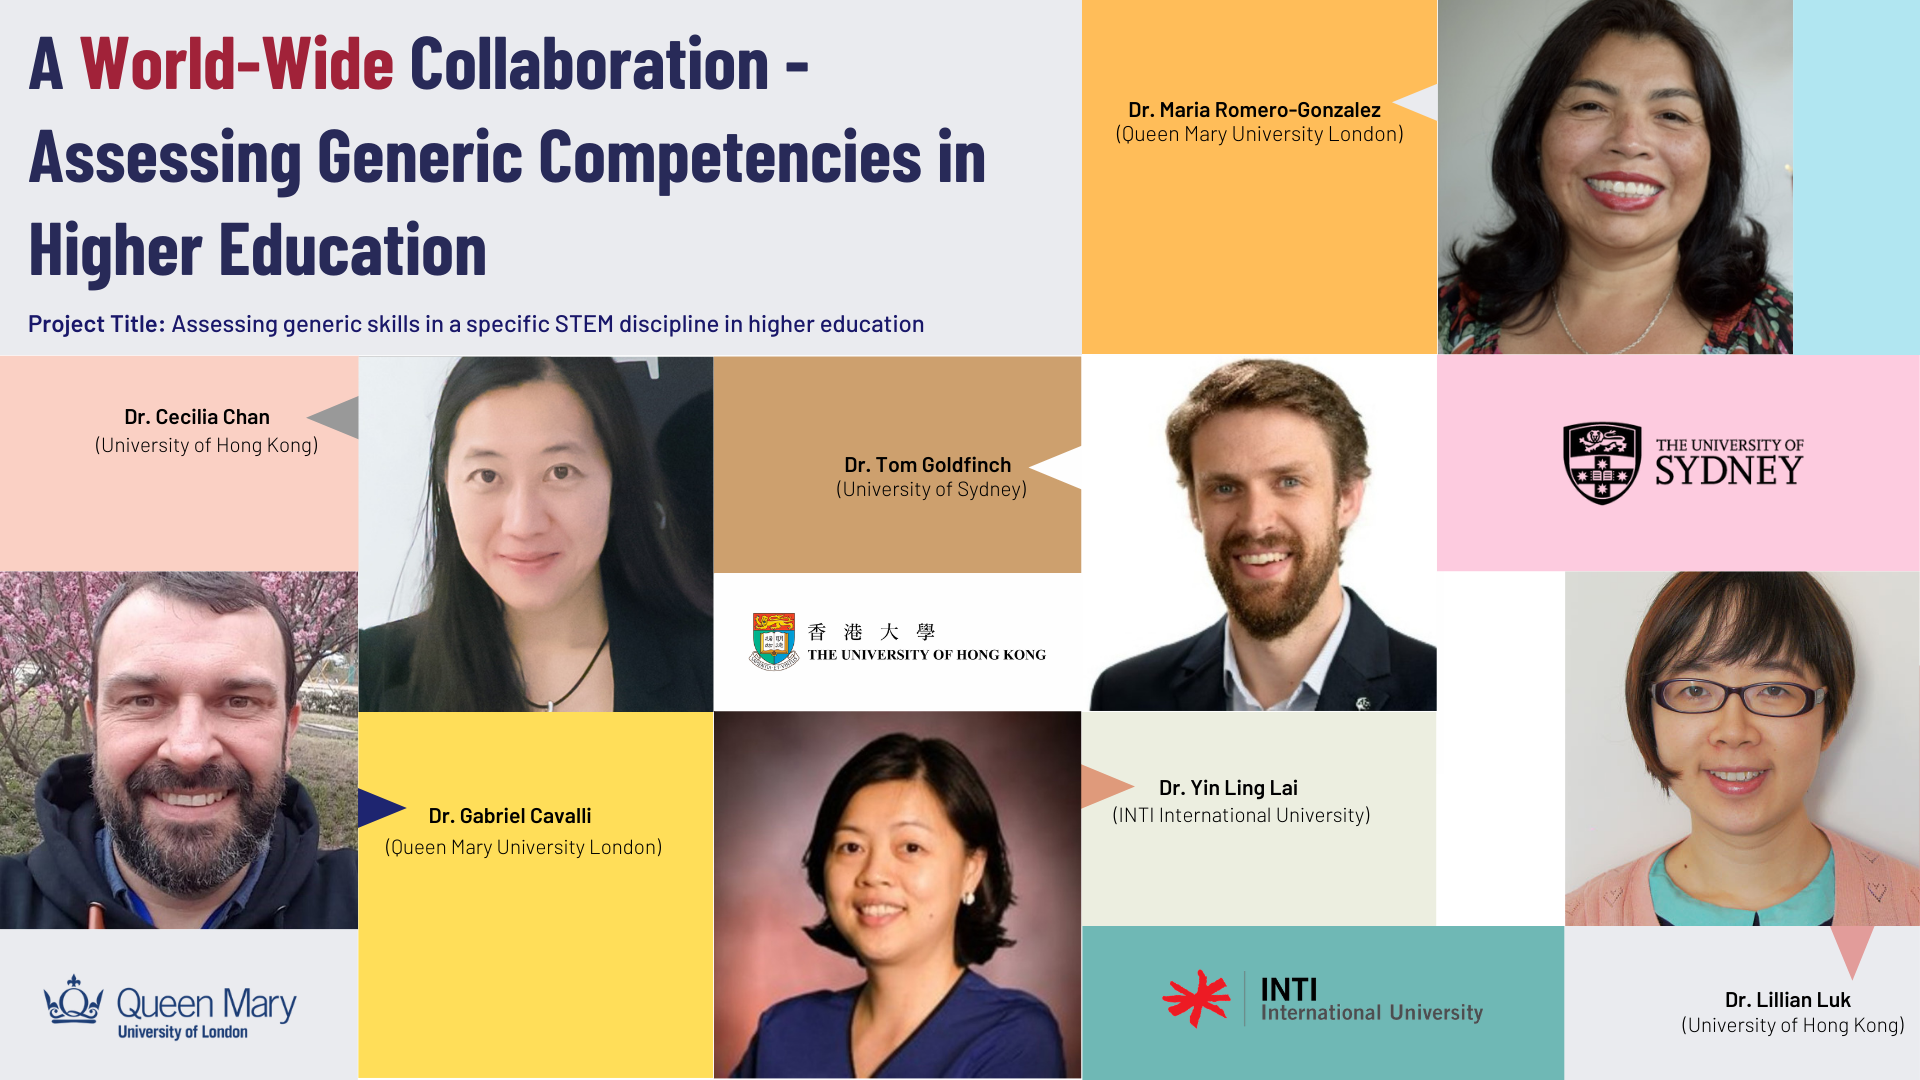 A World-Wide Collaboration - Assessing Generic Competencies in Higher Education